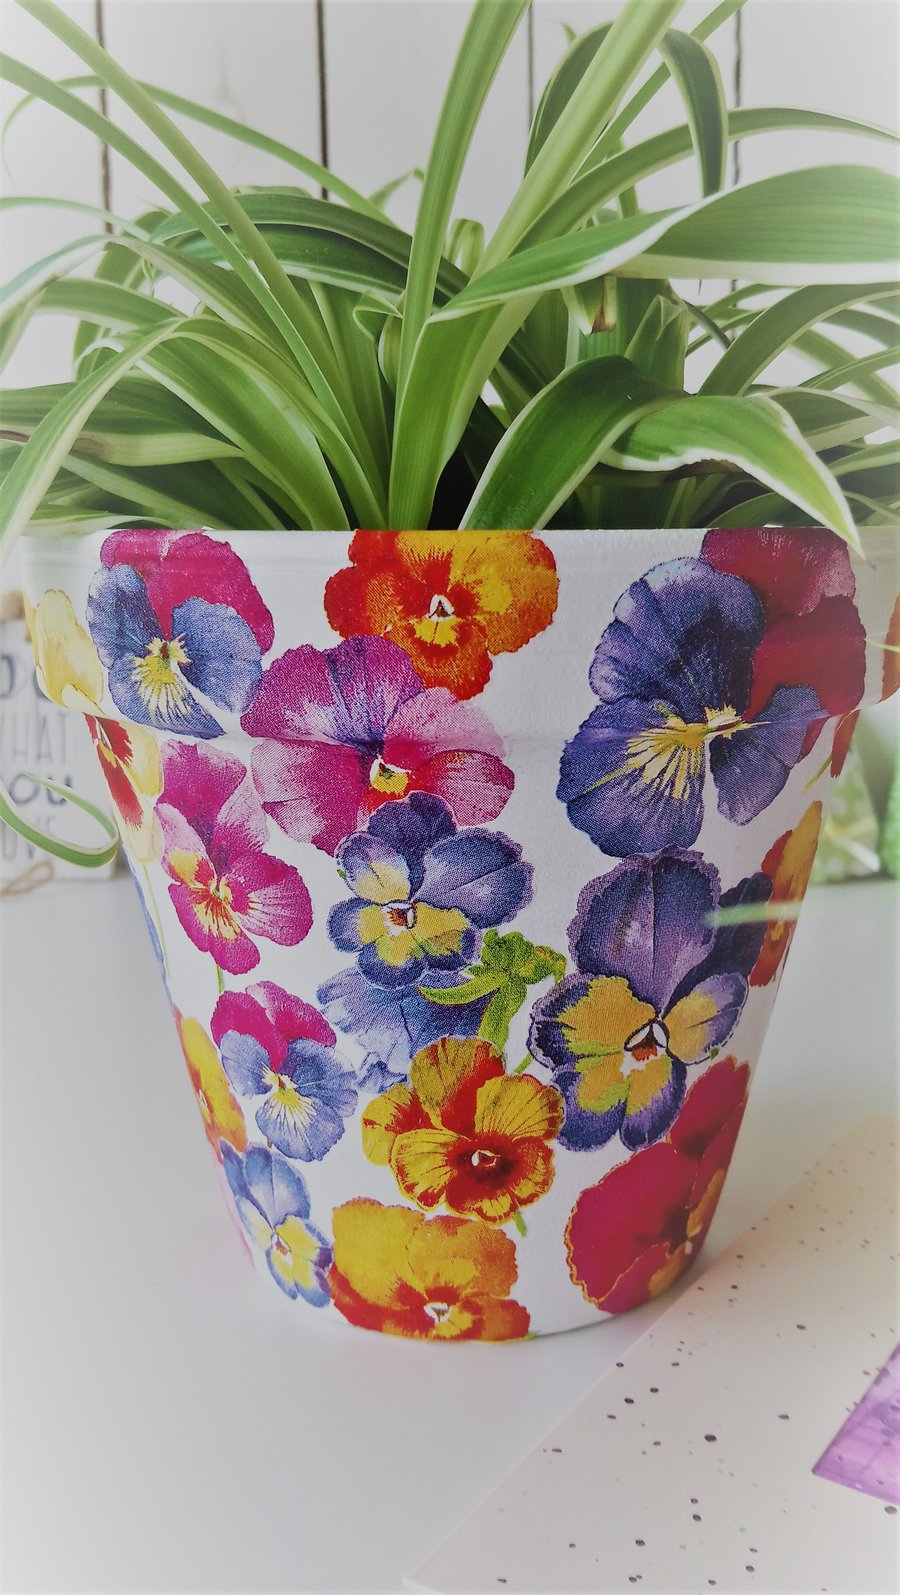 MADE TO ORDER - Decoupaged Pansy Design Indoor Terracotta Pot